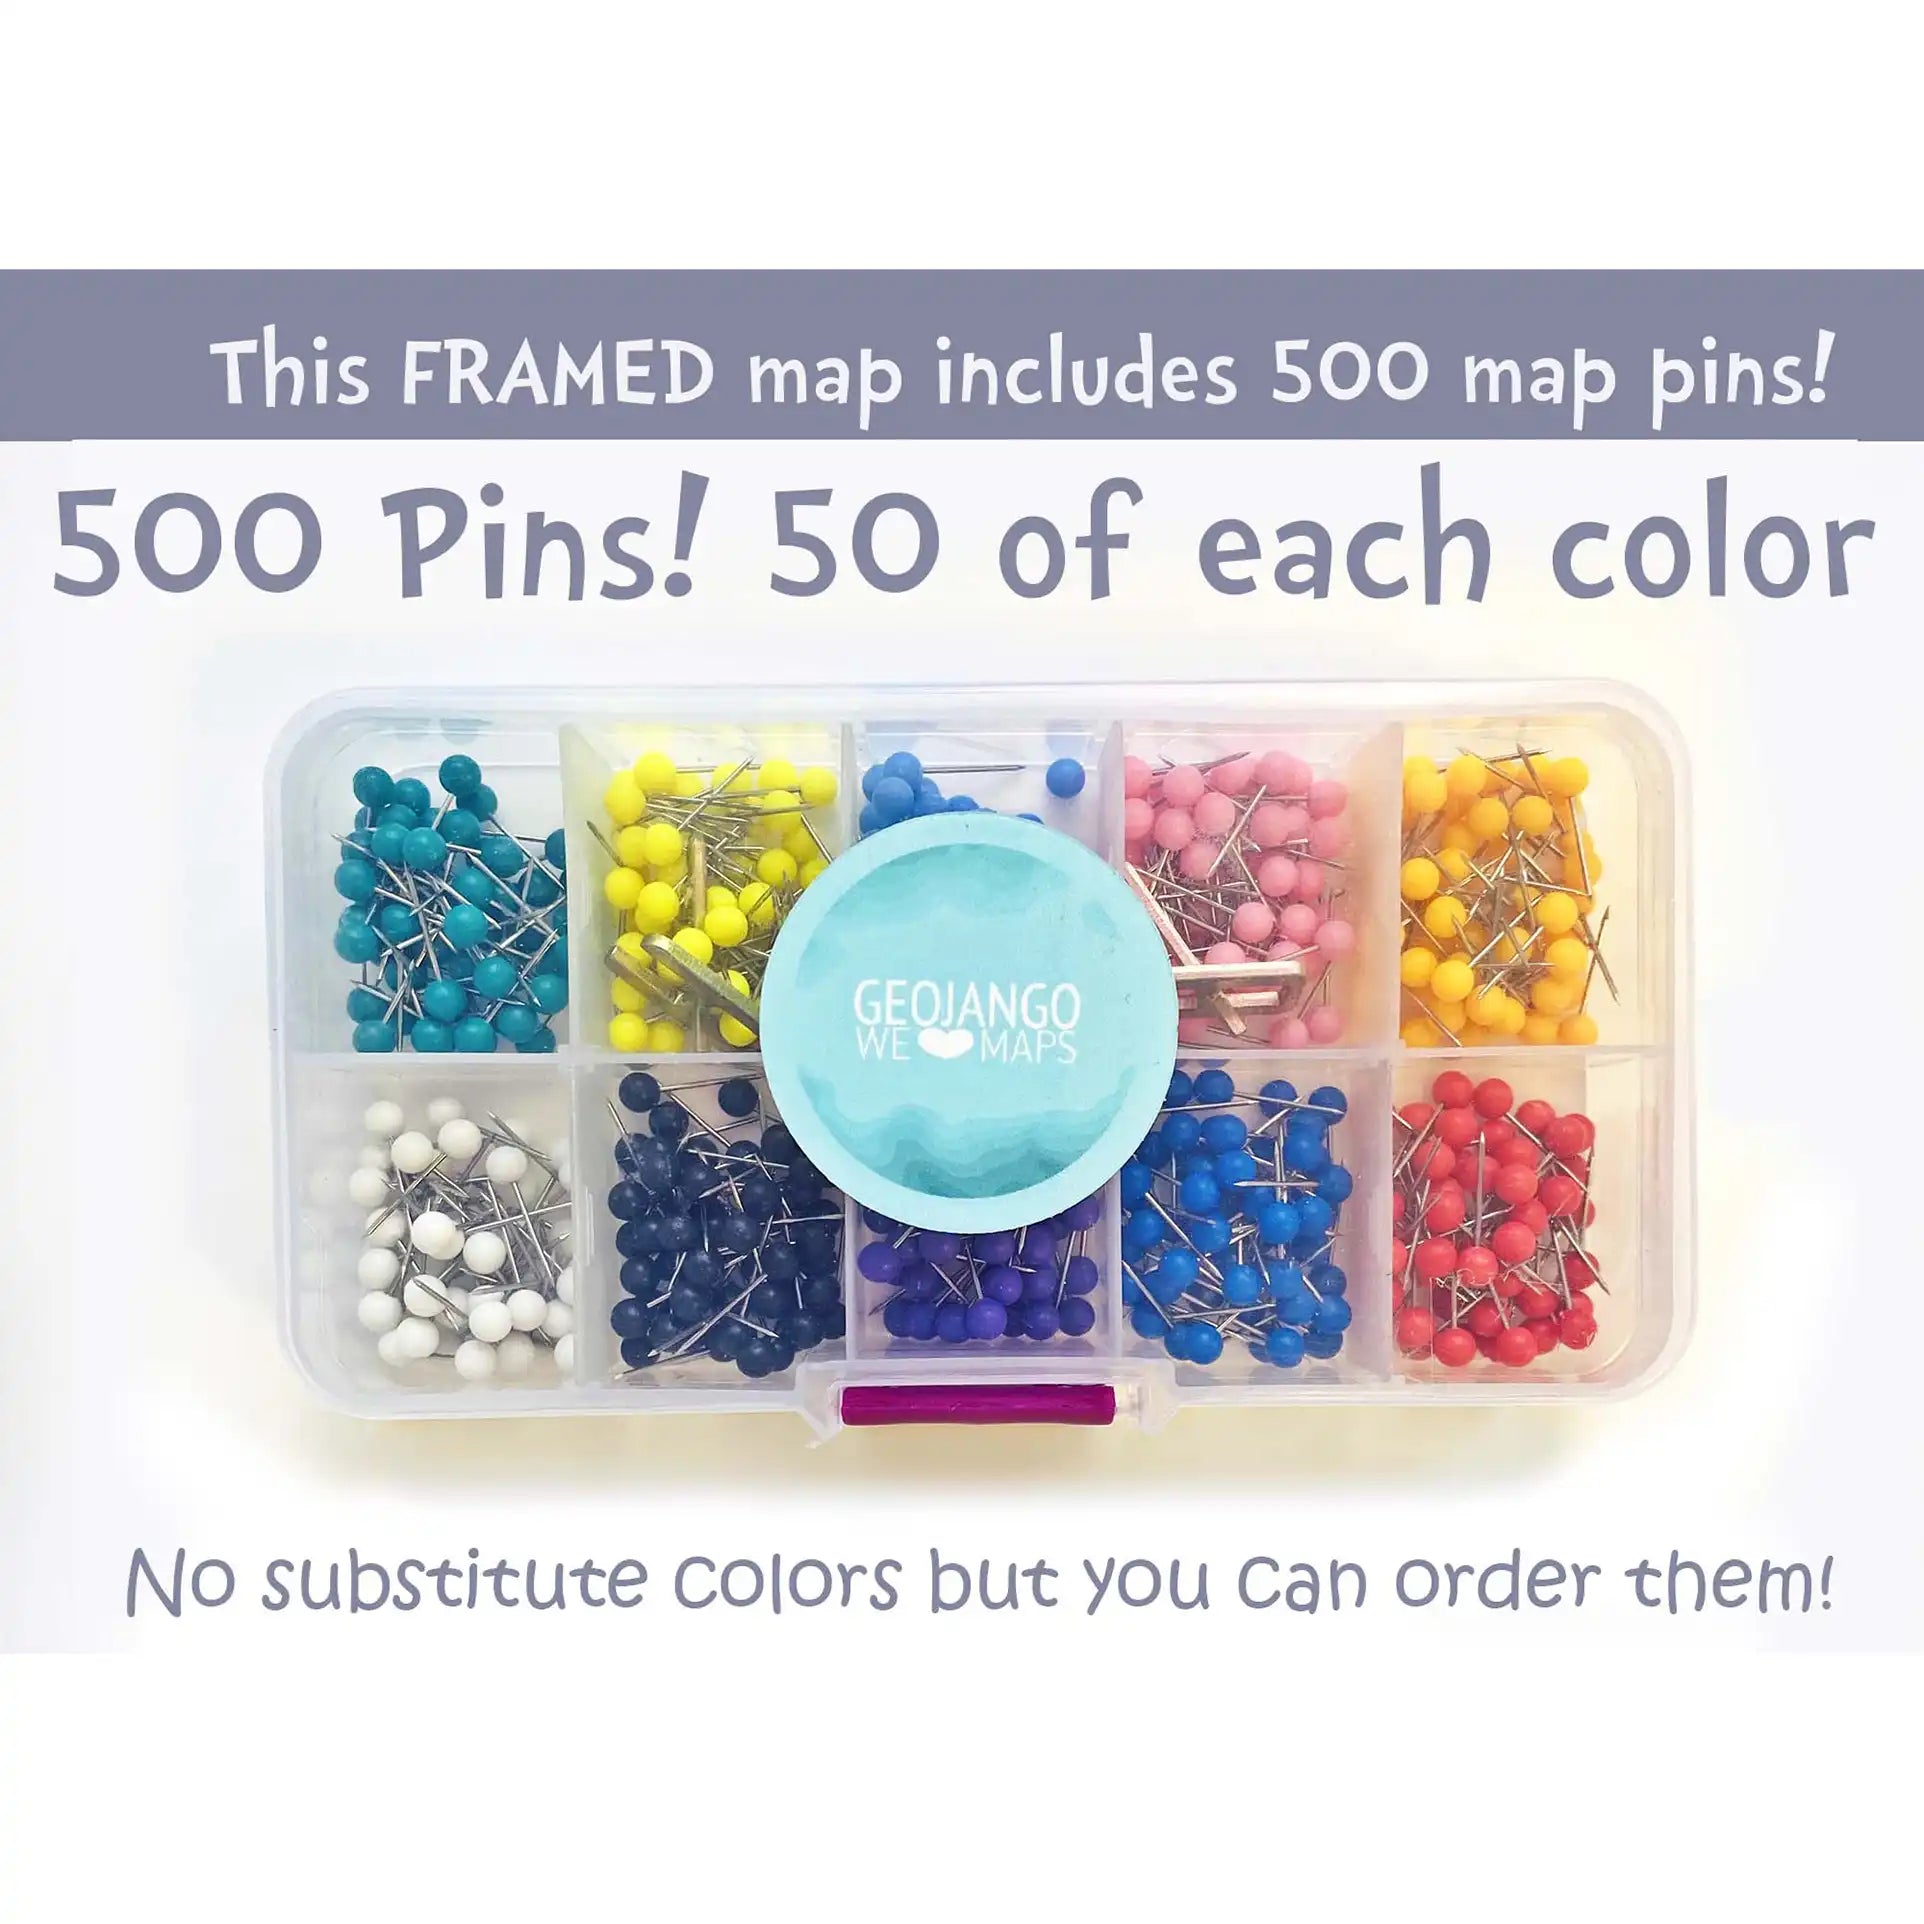 500 Map Pins Included